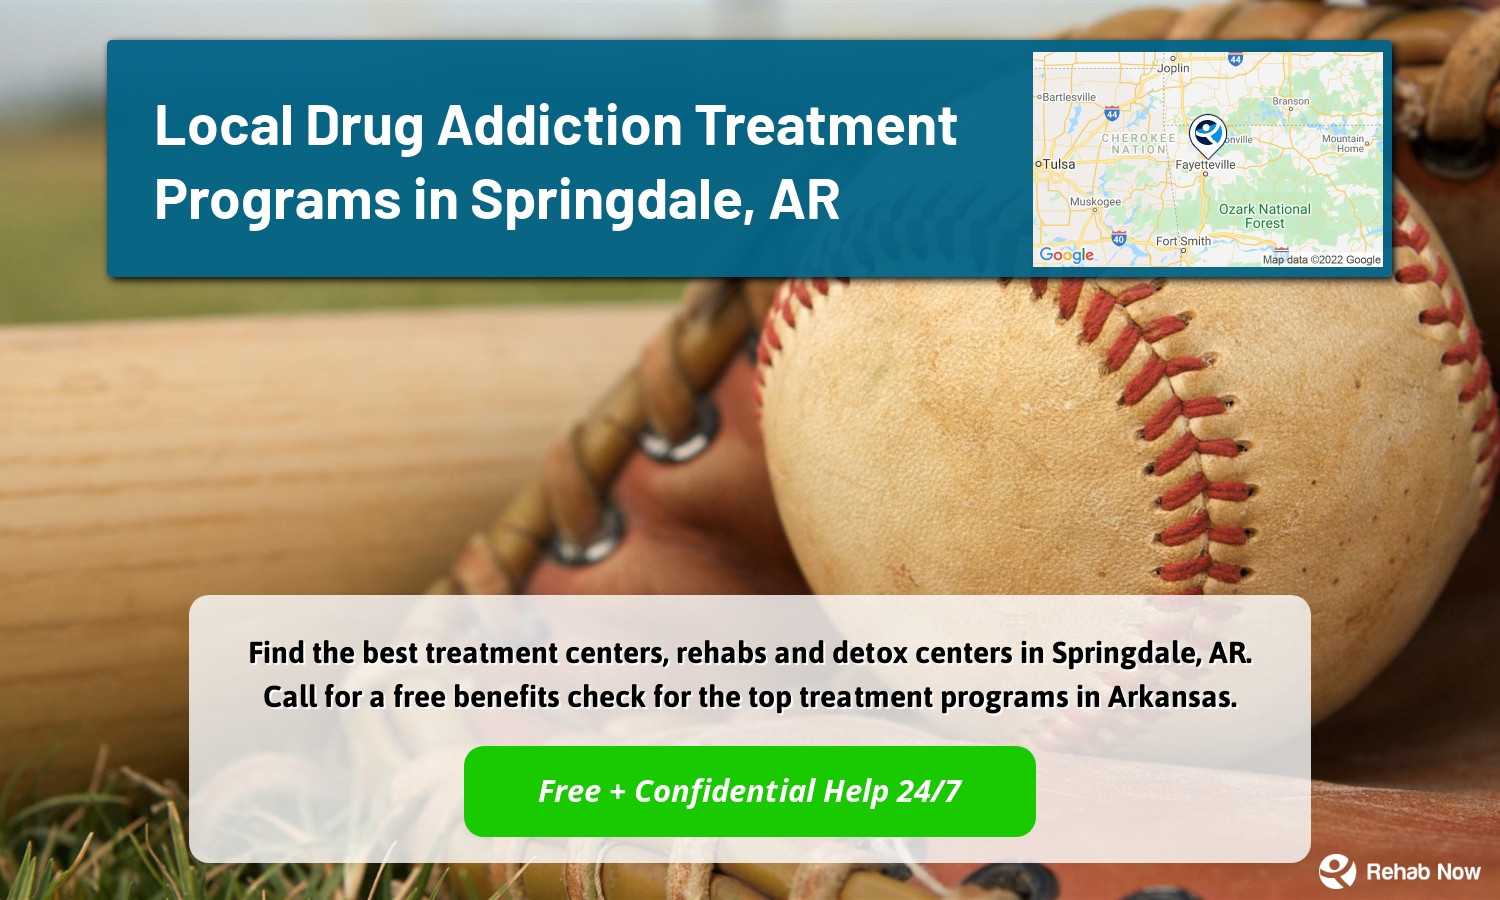 Find the best treatment centers, rehabs and detox centers in Springdale, AR. Call for a free benefits check for the top treatment programs in Arkansas.